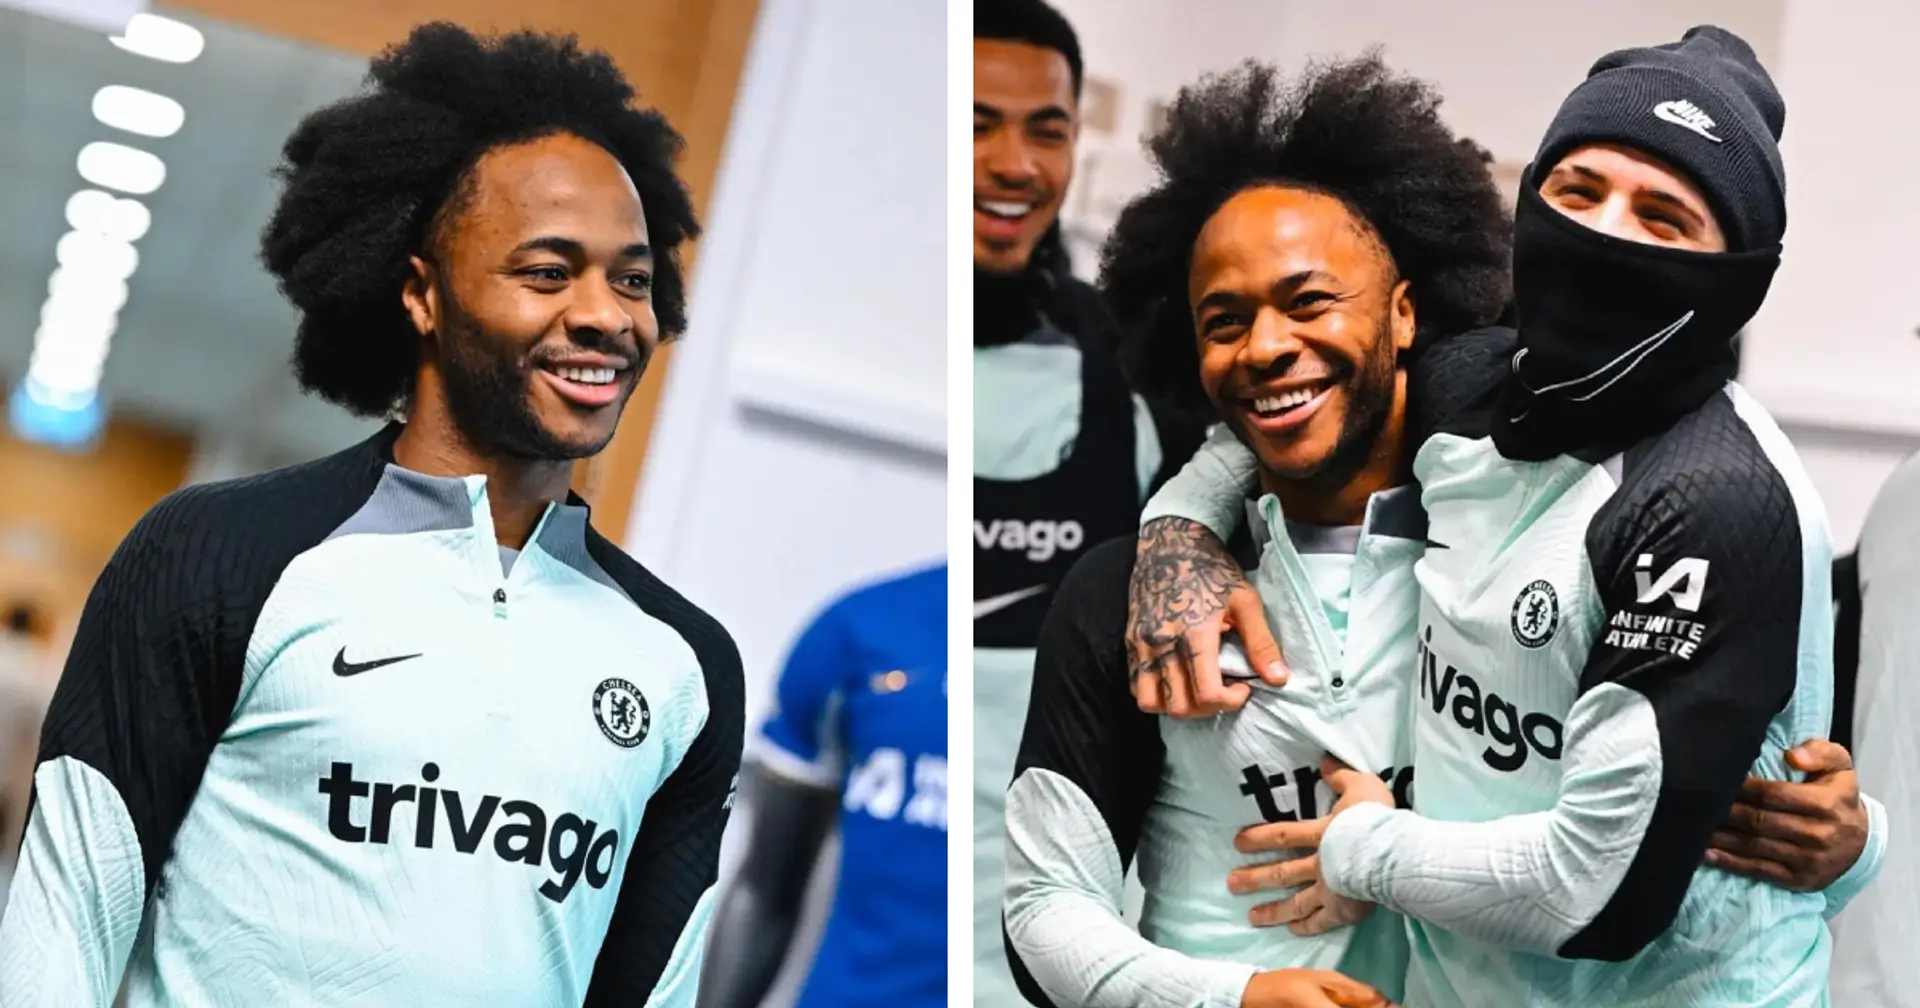 'Willian was in him all along...': fans react as new Sterling trim emerges